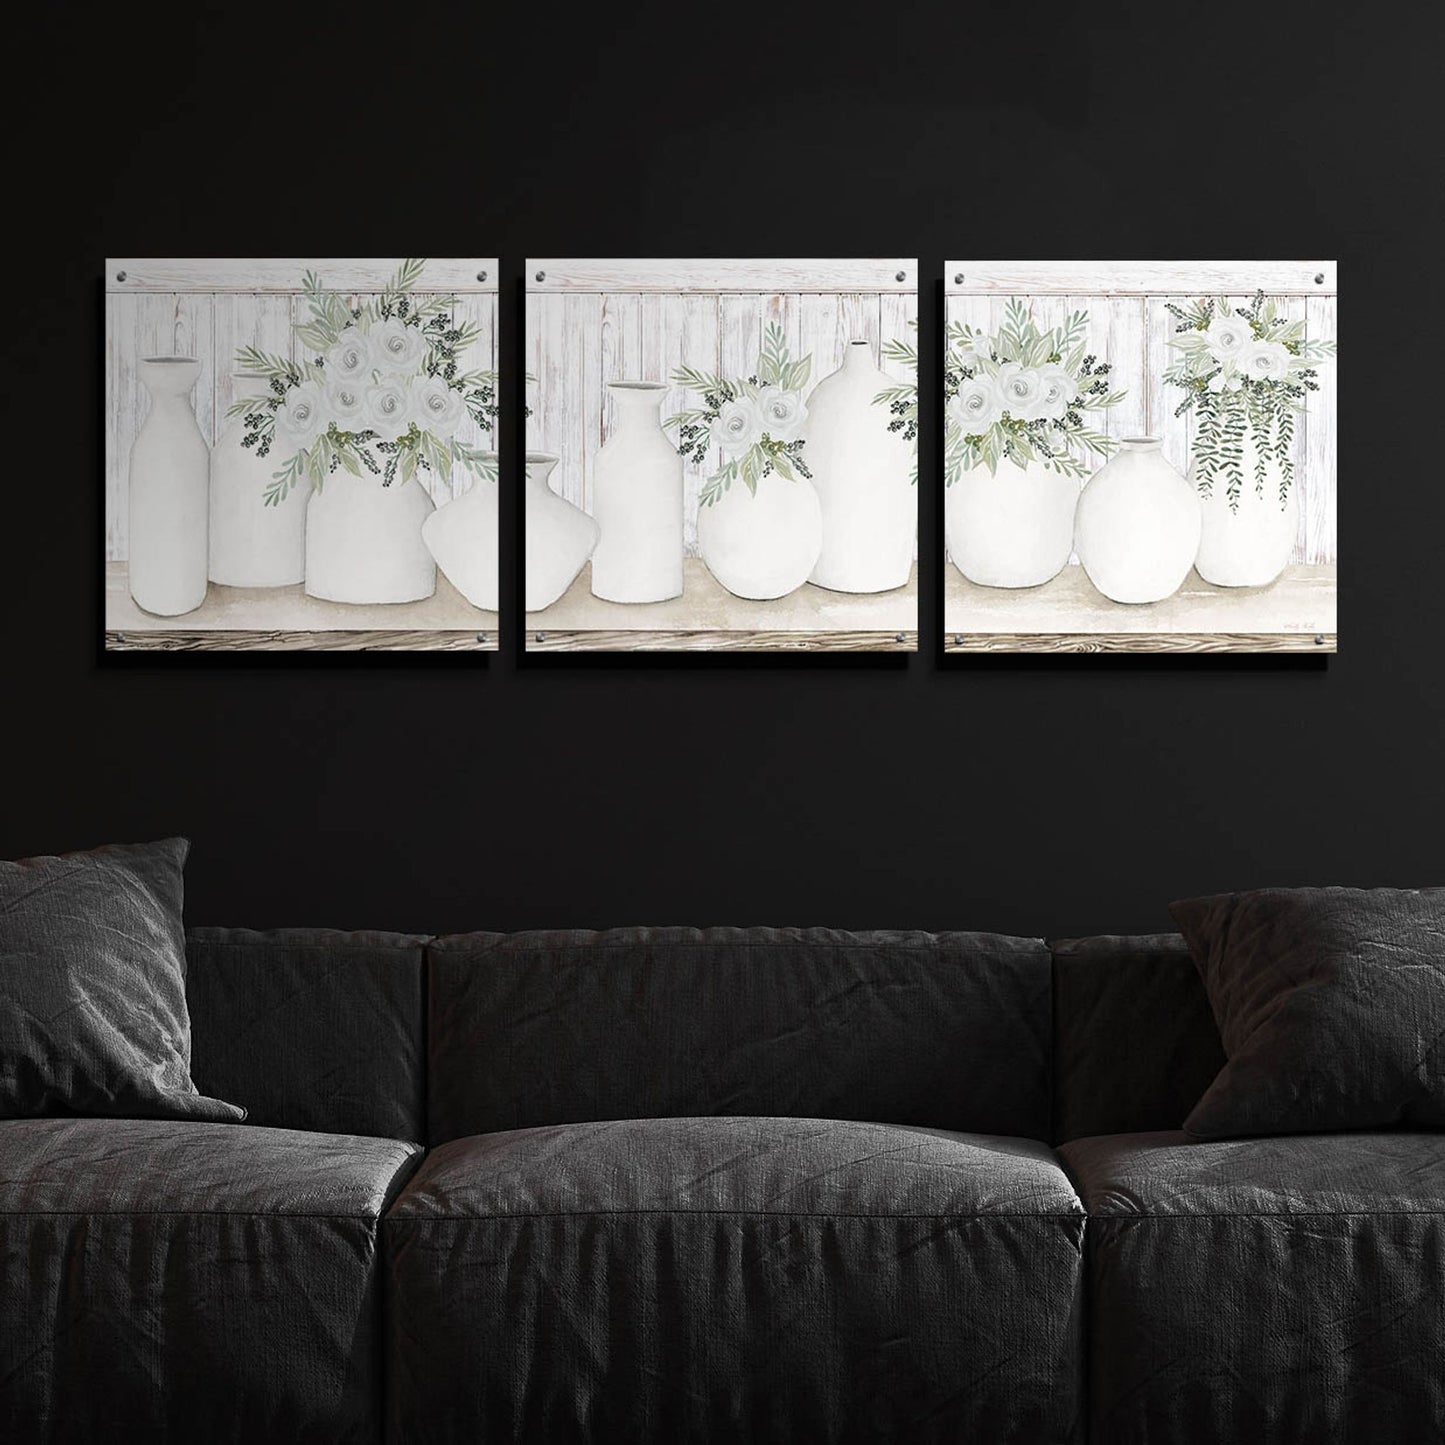 Epic Art 'White Simplicity' by Cindy Jacobs, Acrylic Glass Wall Art, 3 Piece Set,72x24